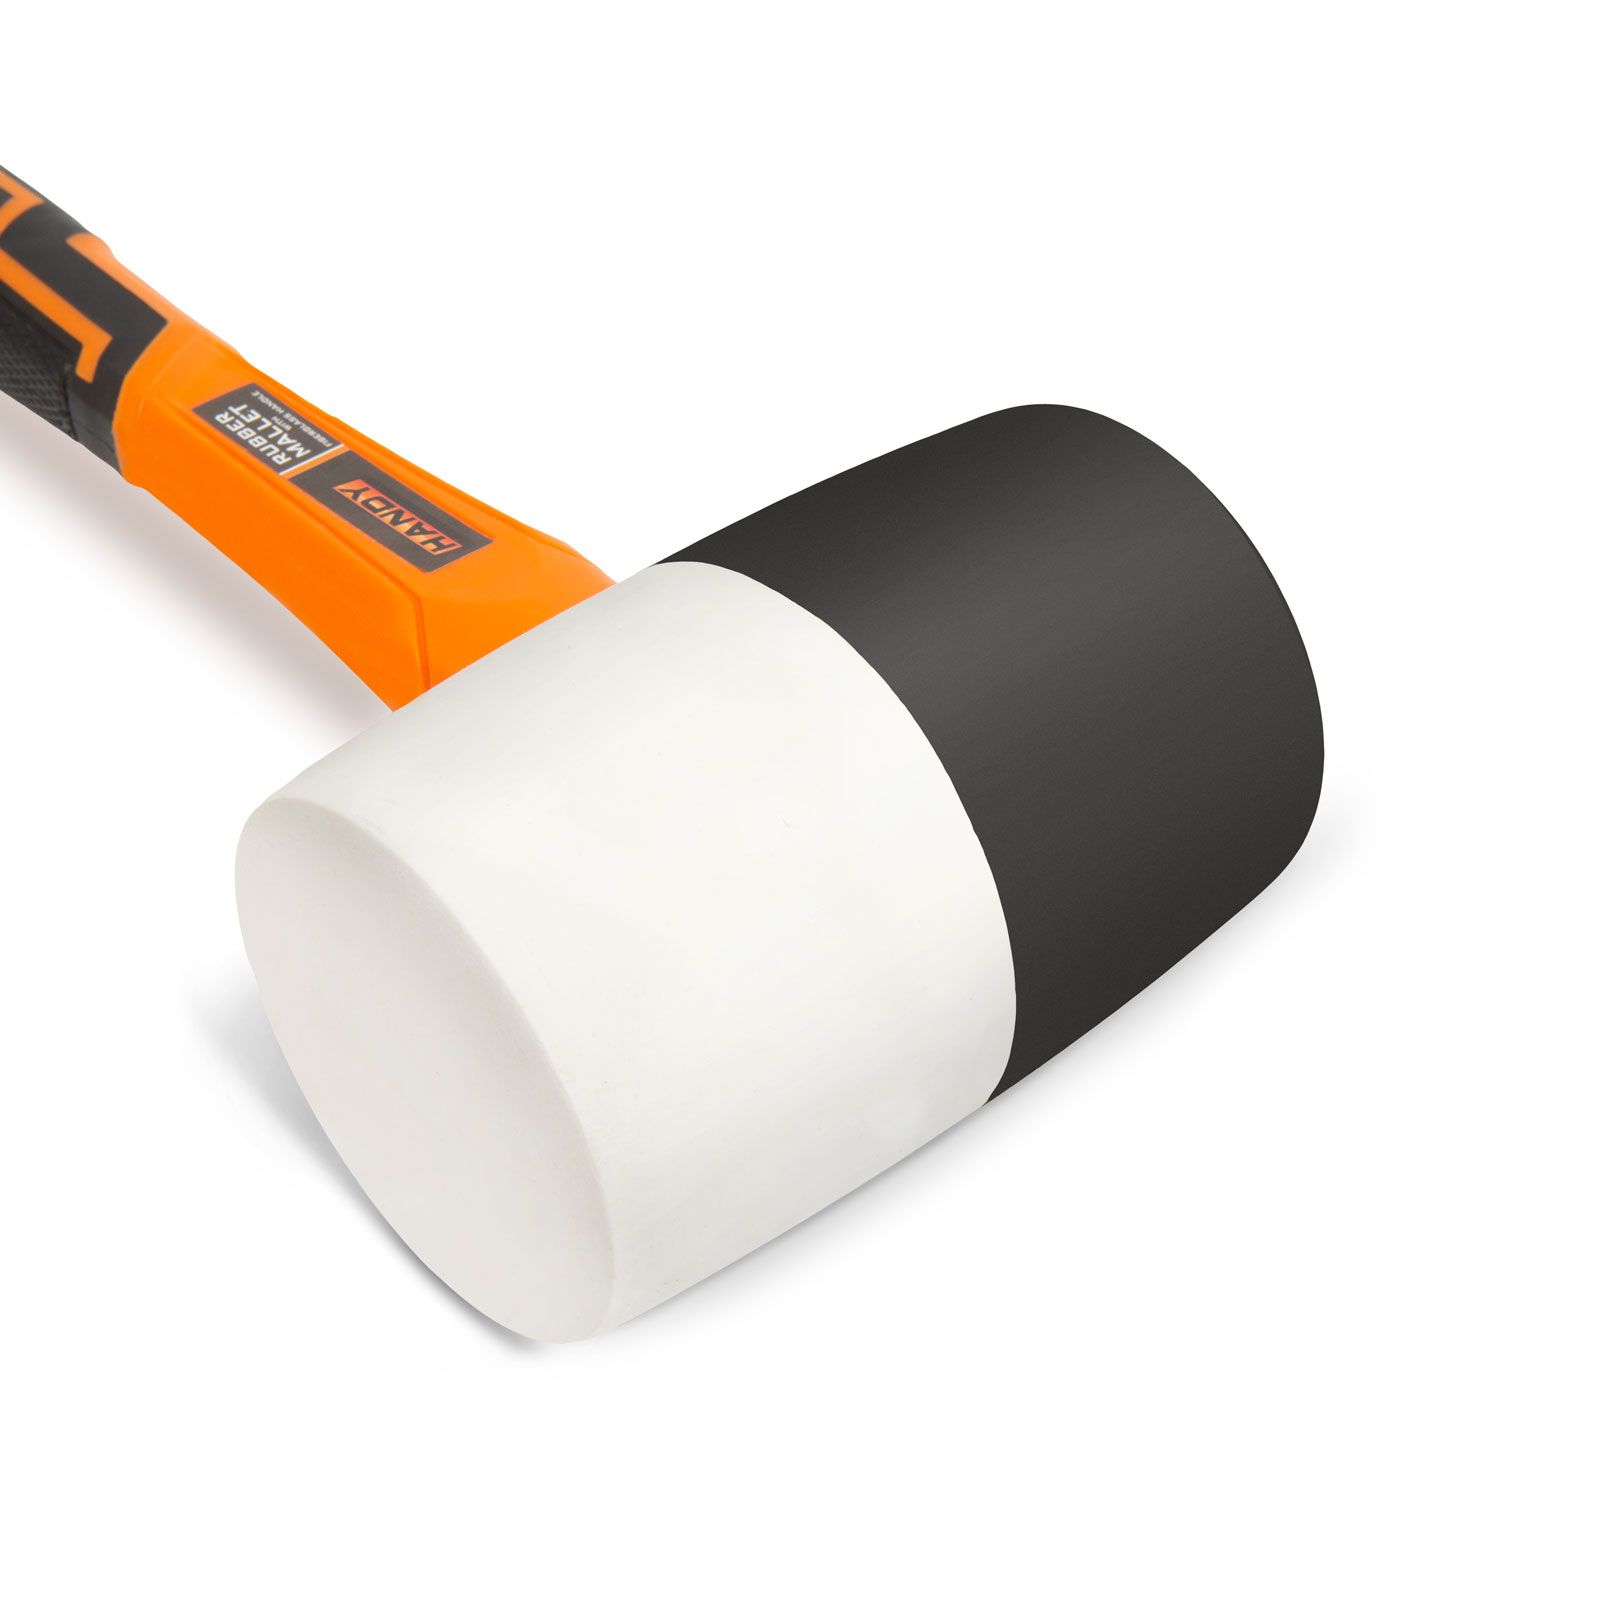 Rubber mallet with fiberglass handle - 907 g thumb